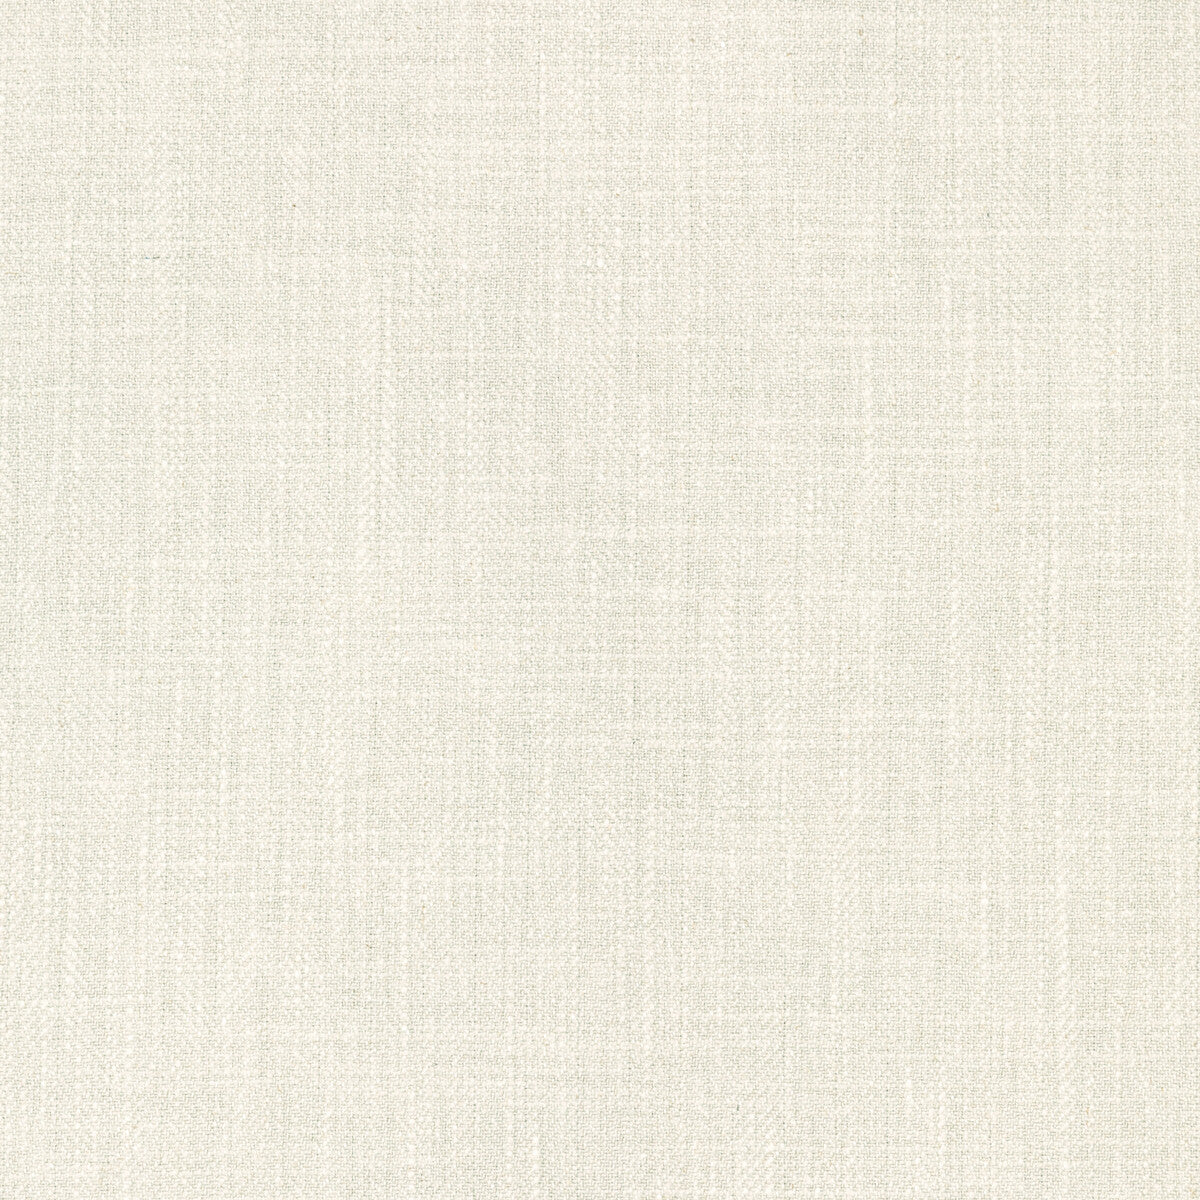 Kravet Basics fabric in 33842-1001 color - pattern 33842.1001.0 - by Kravet Basics in the Perfect Plains collection